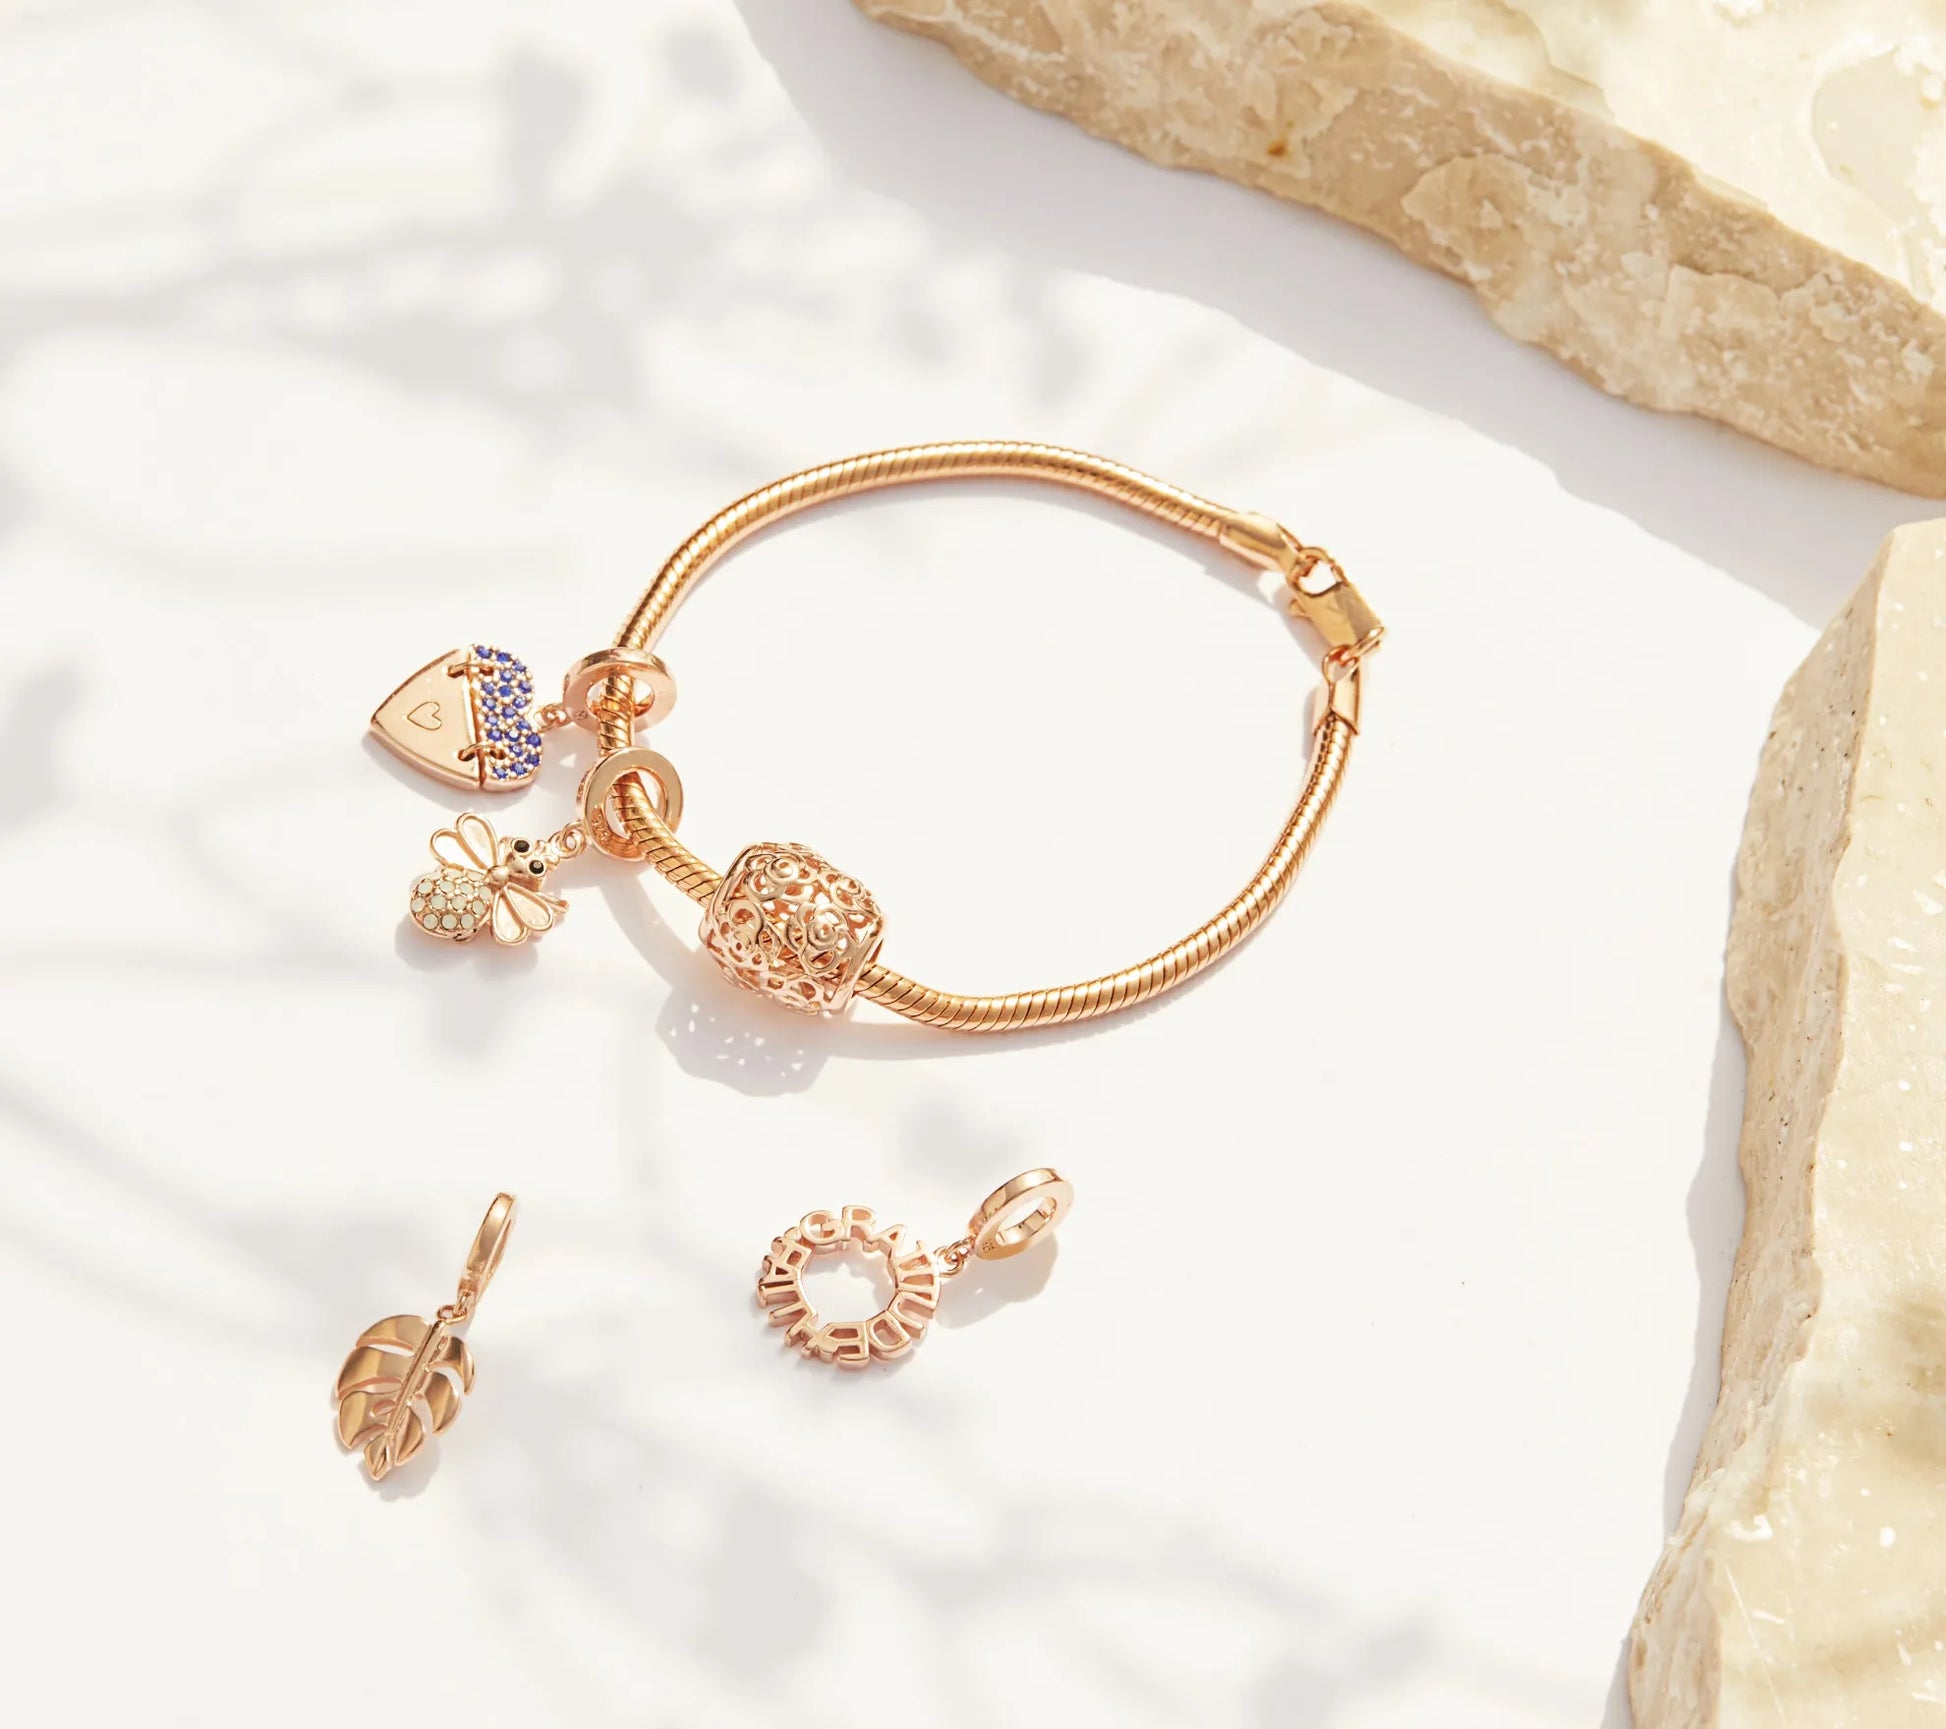 forever-loyal-to-you-charm-rosegold